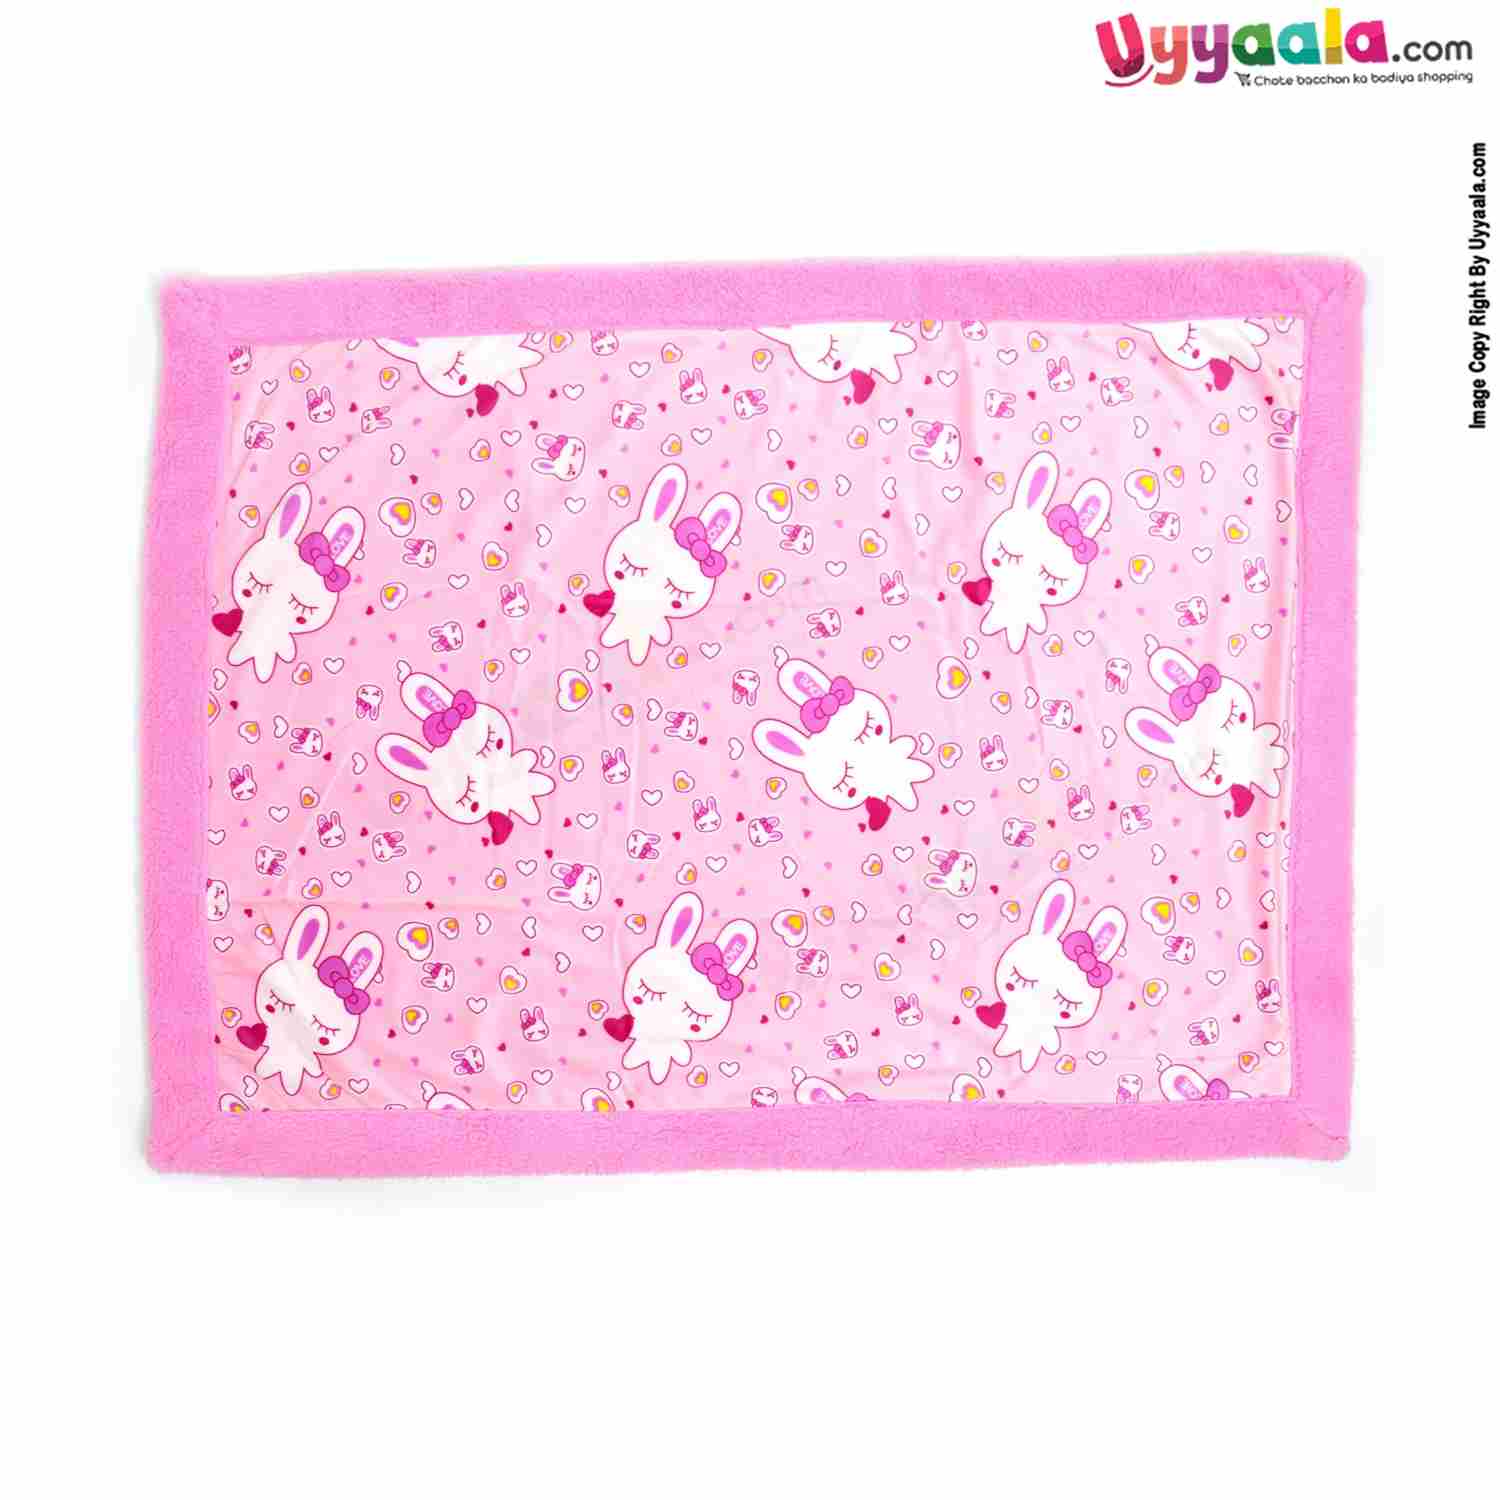 Super Soft Double Layered Blanket One Side Fur & Another Side Velvet with Border & Hello Print for Babies 0-24m Age, Size (102*80 Cm) - Pink